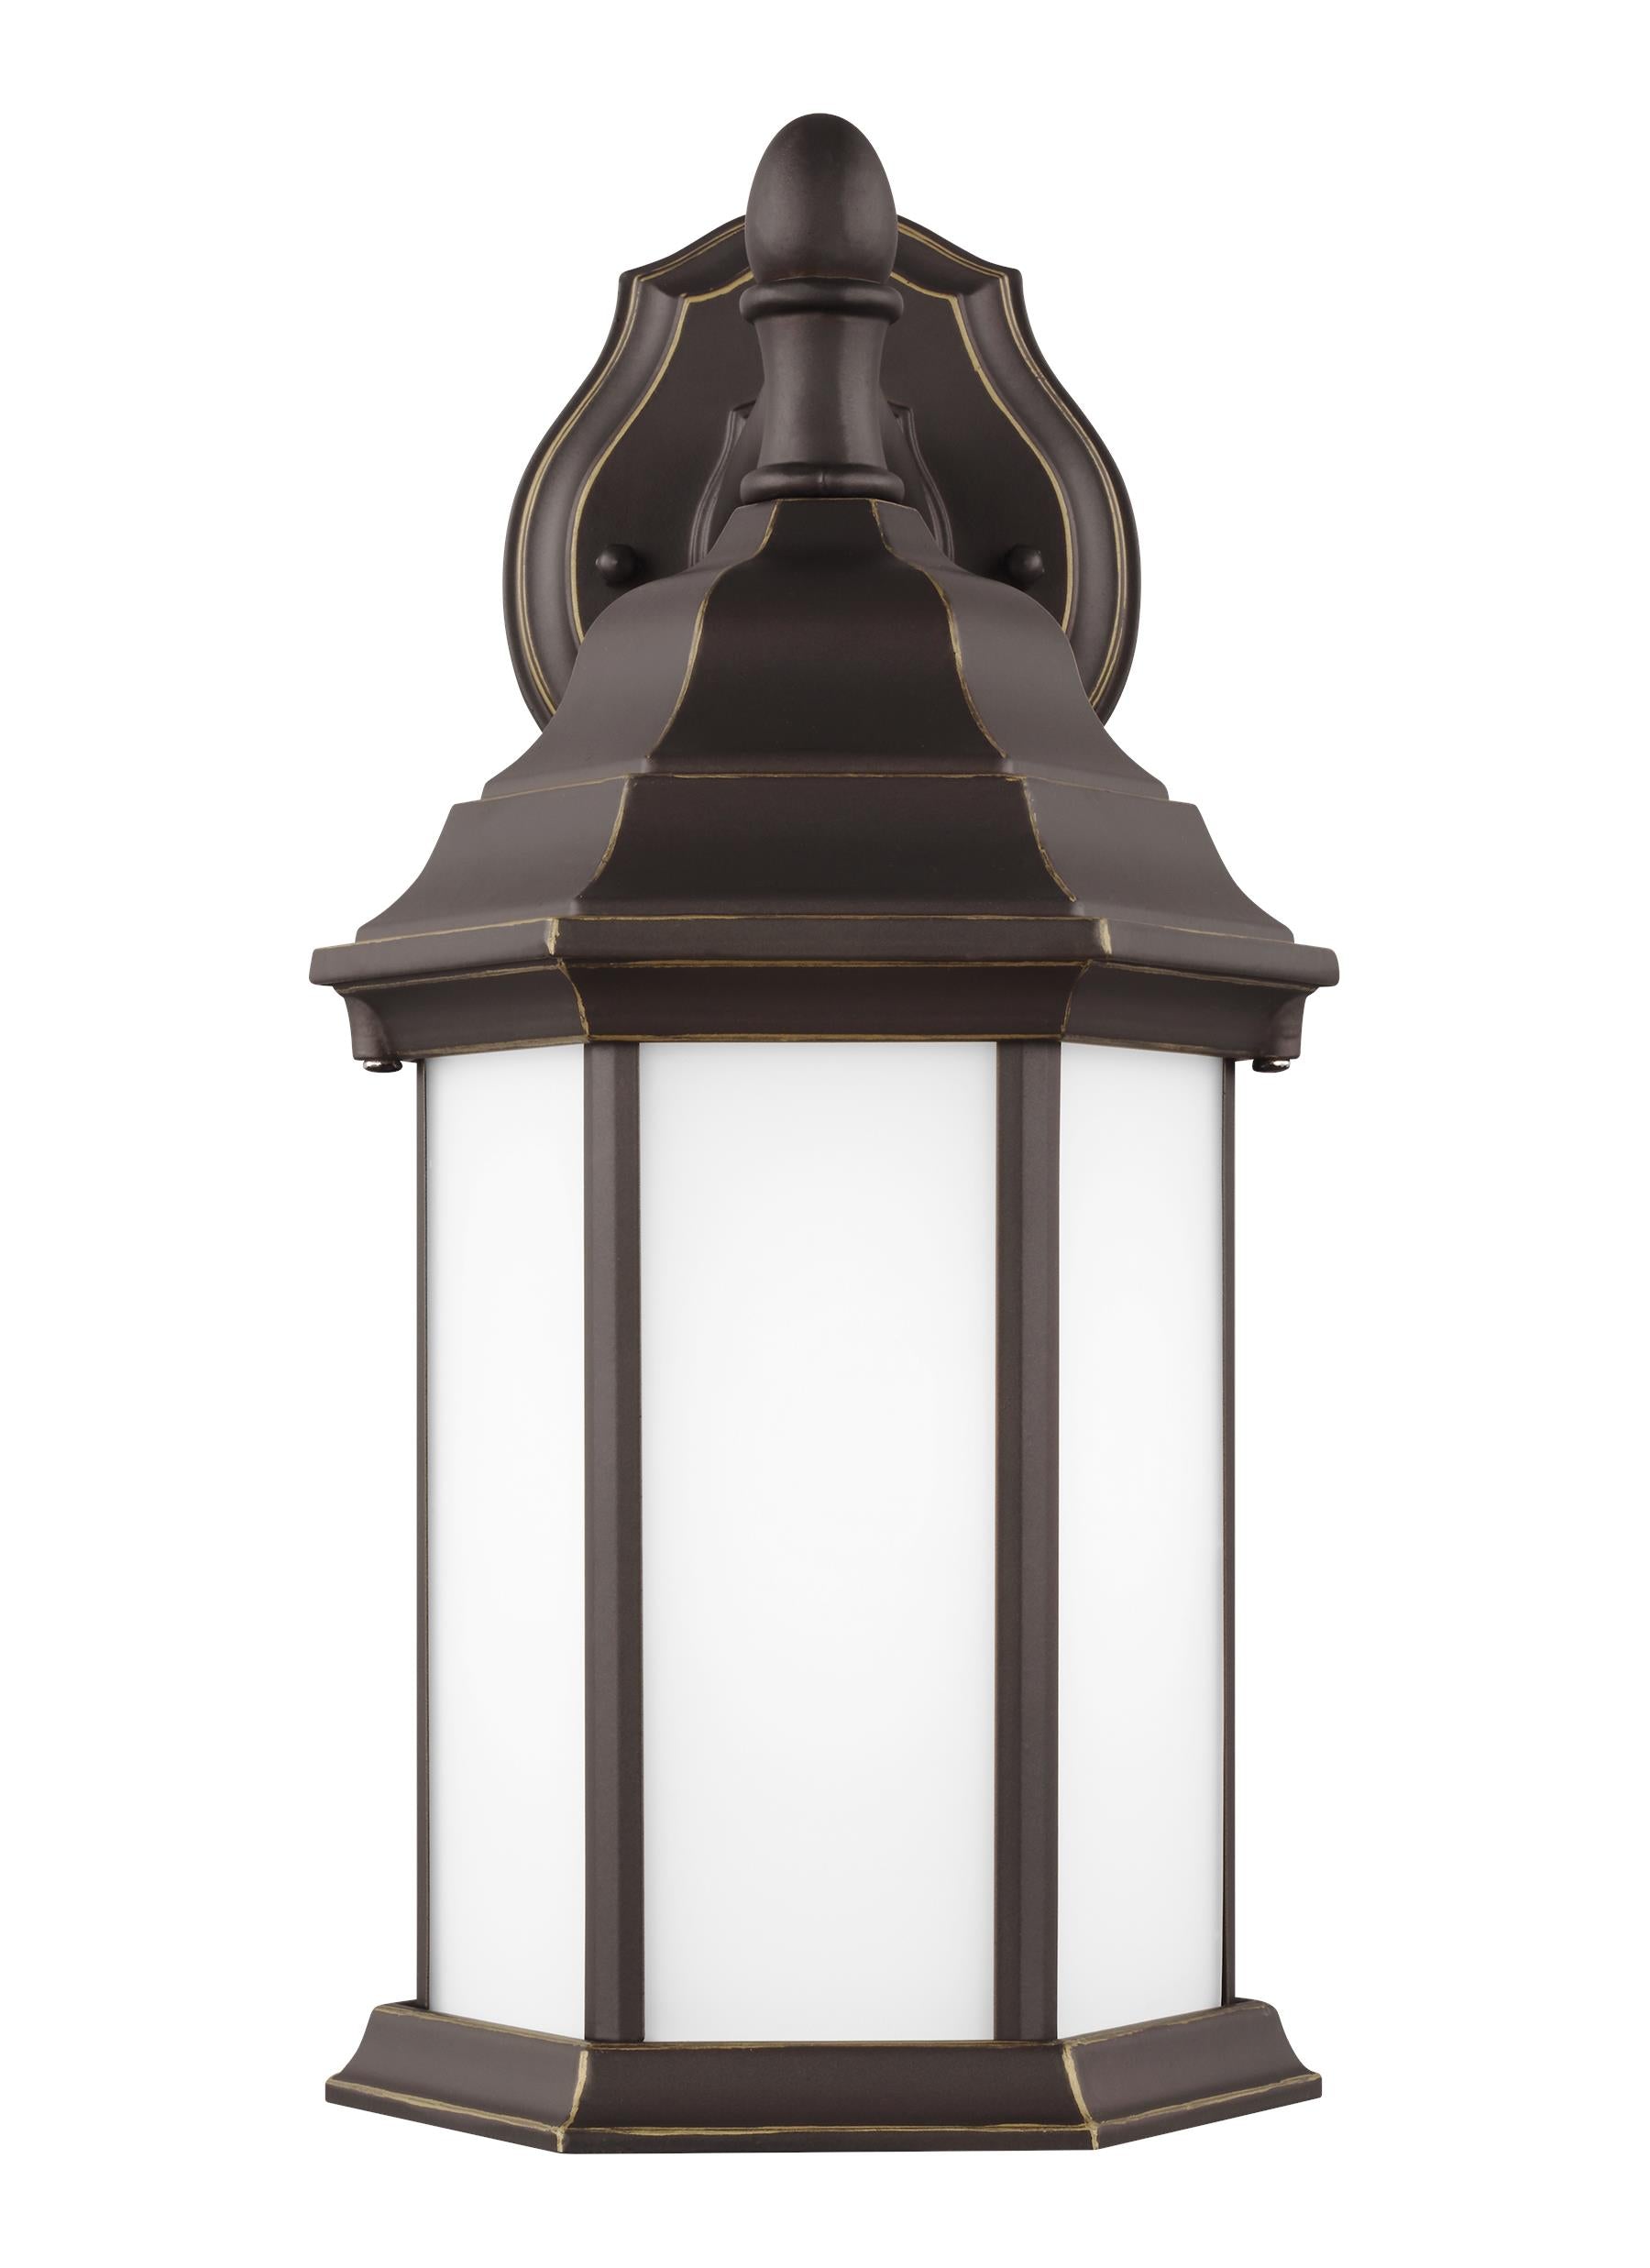 Sevier traditional 1-light outdoor exterior small downlight outdoor wall lantern sconce in antique bronze finish with sati...